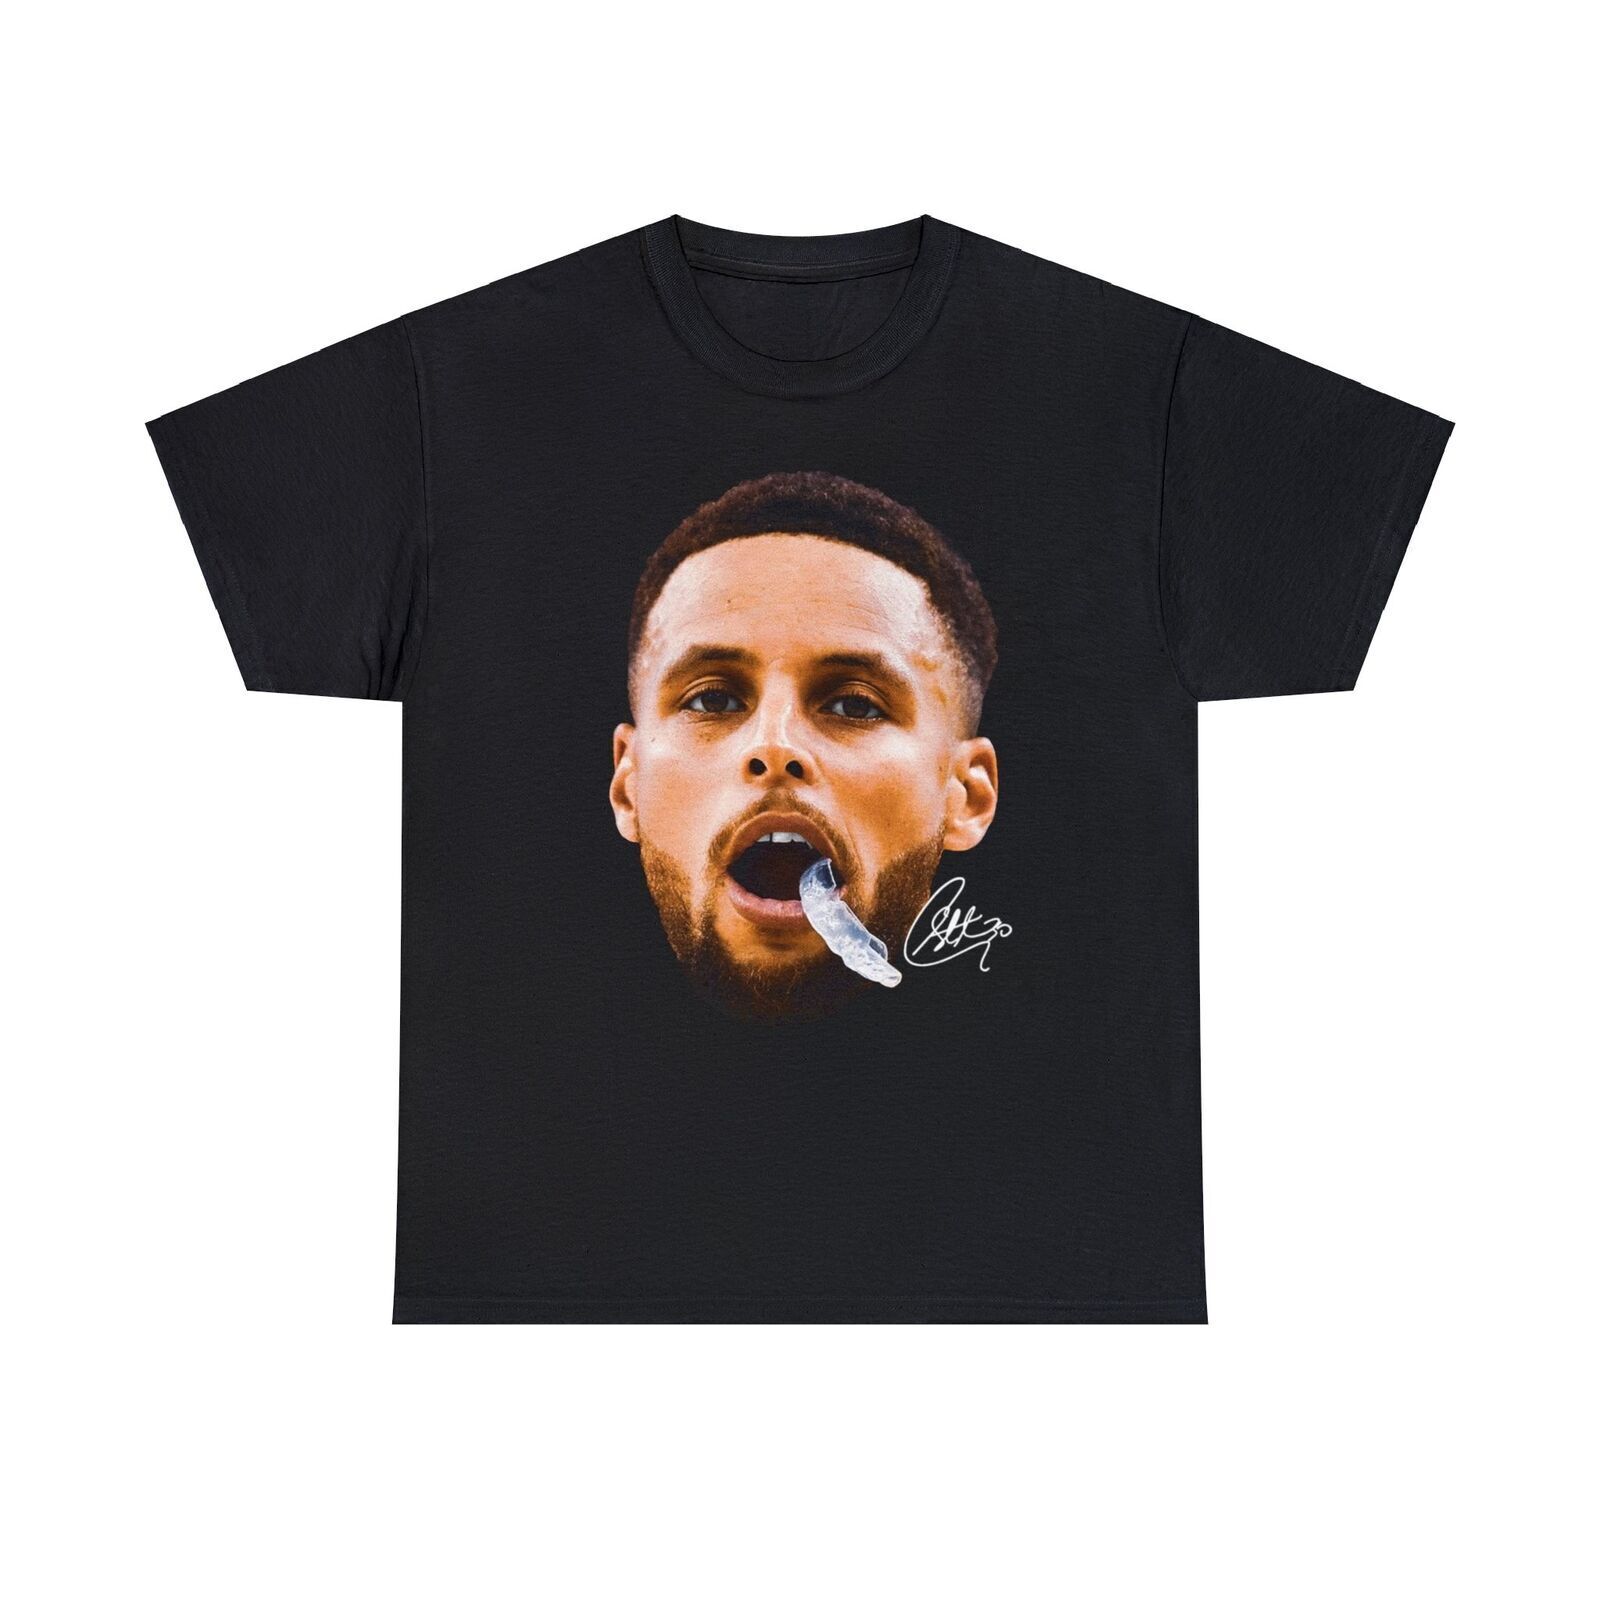 STEPH CURRY T-SHIRT | Rare NBA Graphic Tee Vintage Style Graphic Print